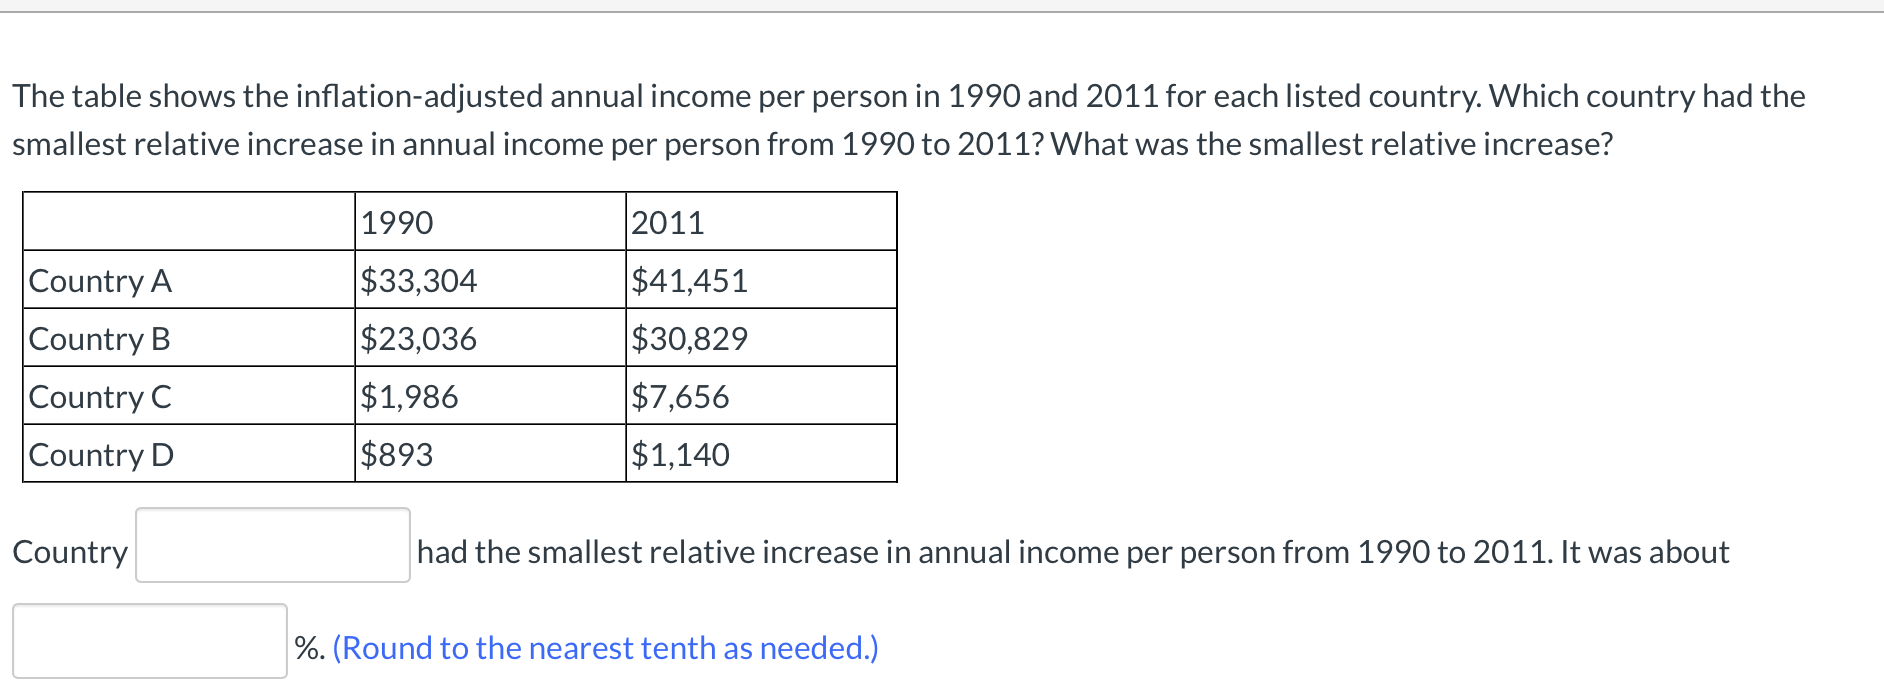 The table shows the inflation-adjusted annual income per person in 1990 and 2011 for each listed country. Which country had the
smallest relative increase in annual income per person from 1990 to 2011? What was the smallest relative increase?
|1990
2011
|Country A
$33,304
$41,451
Country B
$23,036
$30,829
Country C
$1,986
$7,656
Country D
$893
$1,140
Country
had the smallest relative increase in annual income per person from 1990 to 2011. It was about
%. (Round to the nearest tenth as needed.)
